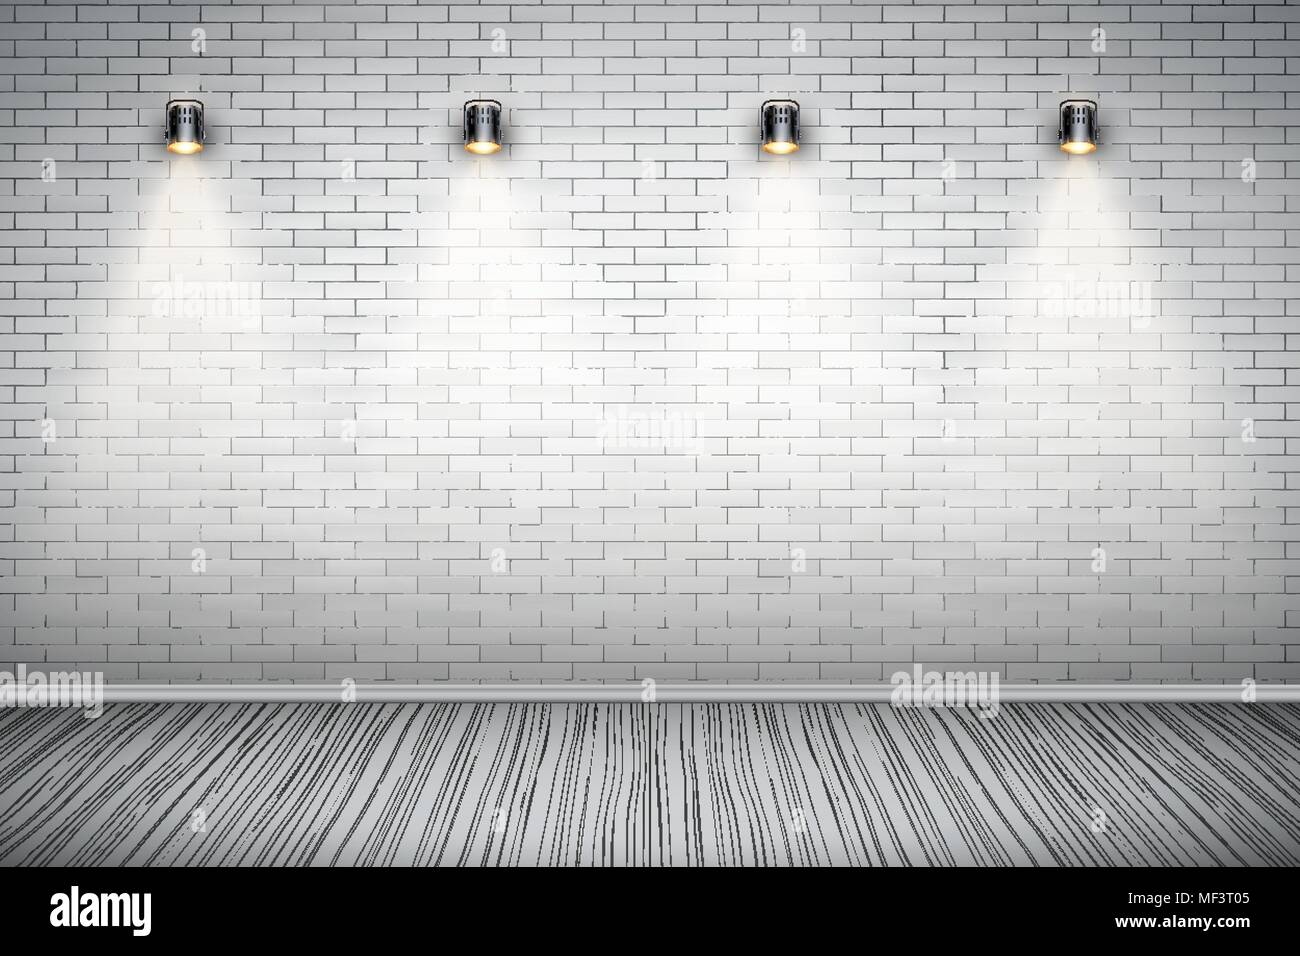 White brick wall room with vintage spotlights Stock Vector